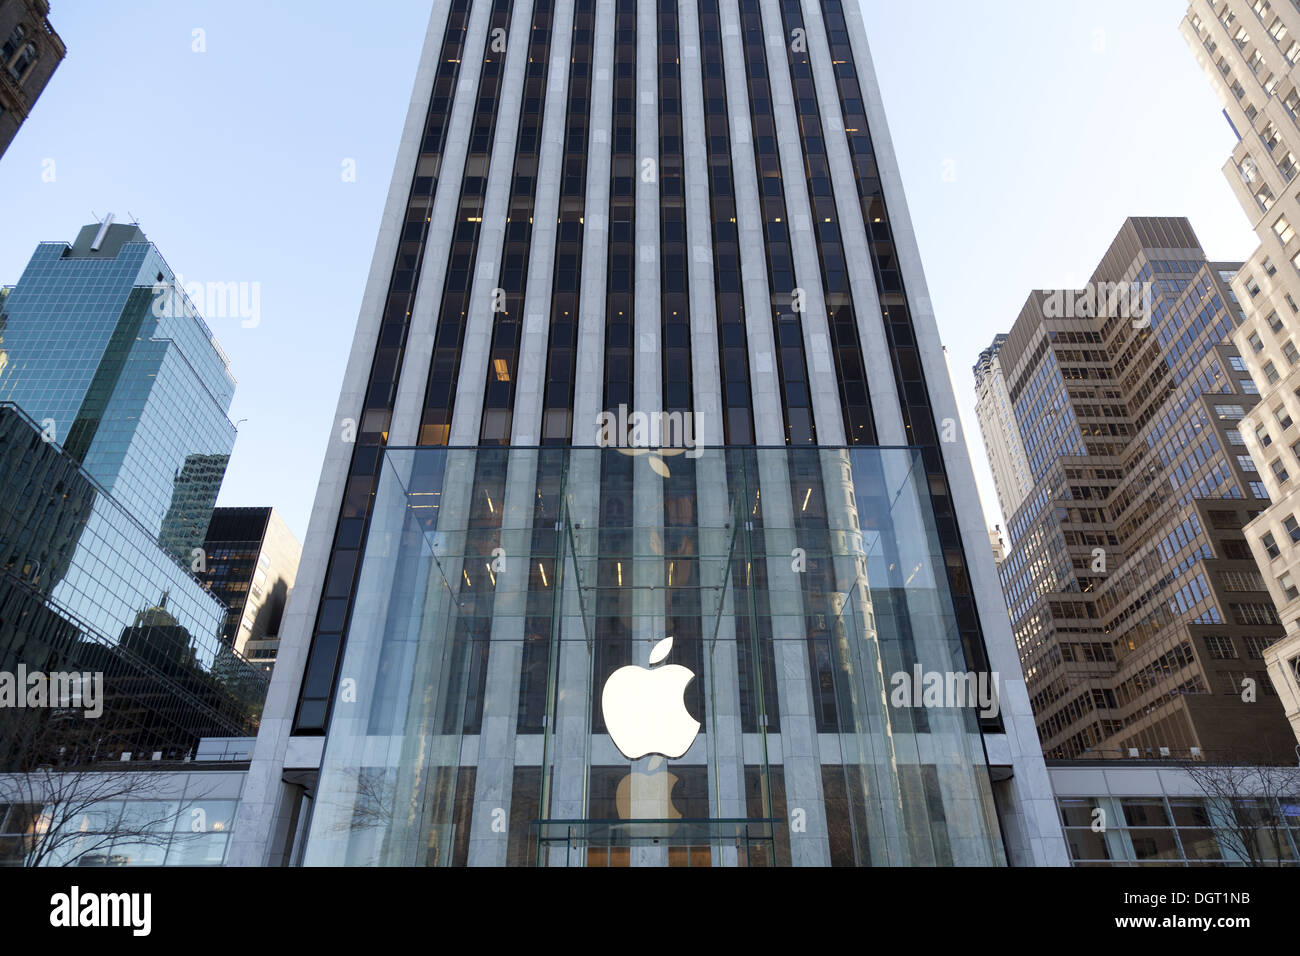 NEW YORK - the renovated Apple computer store Glass Cube on 5th Avenue in New York City, on January 9, 2012 Stock Photo